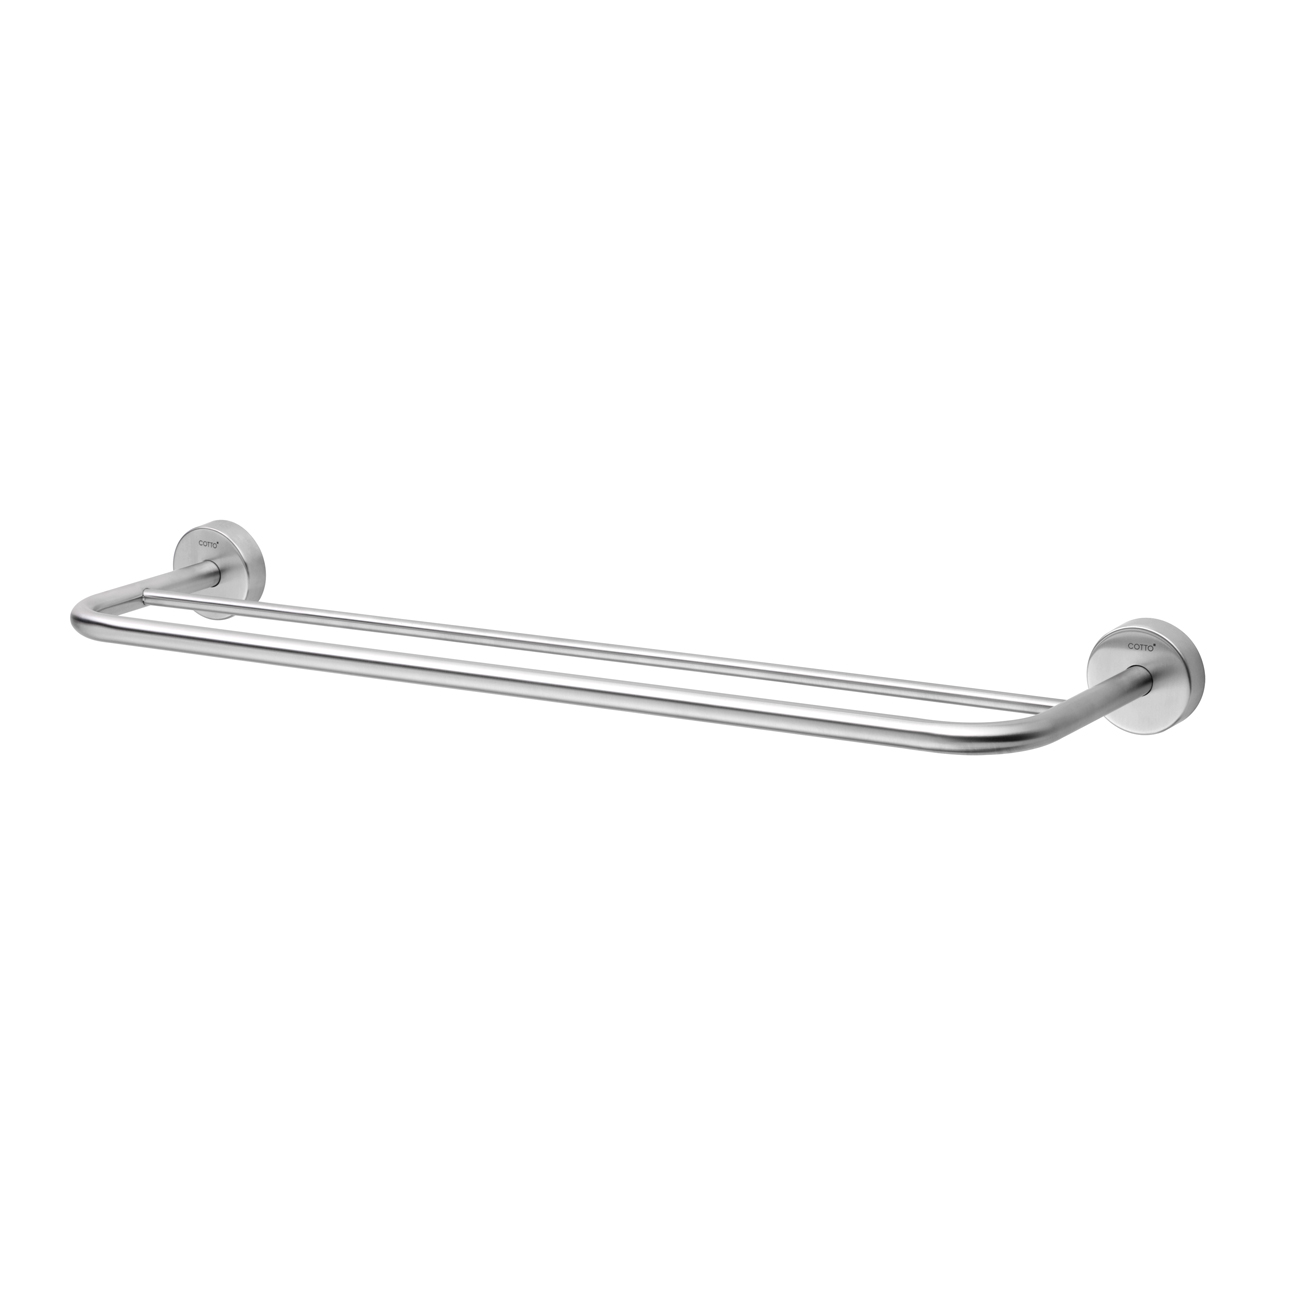 CT0151(HM) 60 Cm. Stainless Towel Bar / 2 Bar, New Hotel Series - COTTO